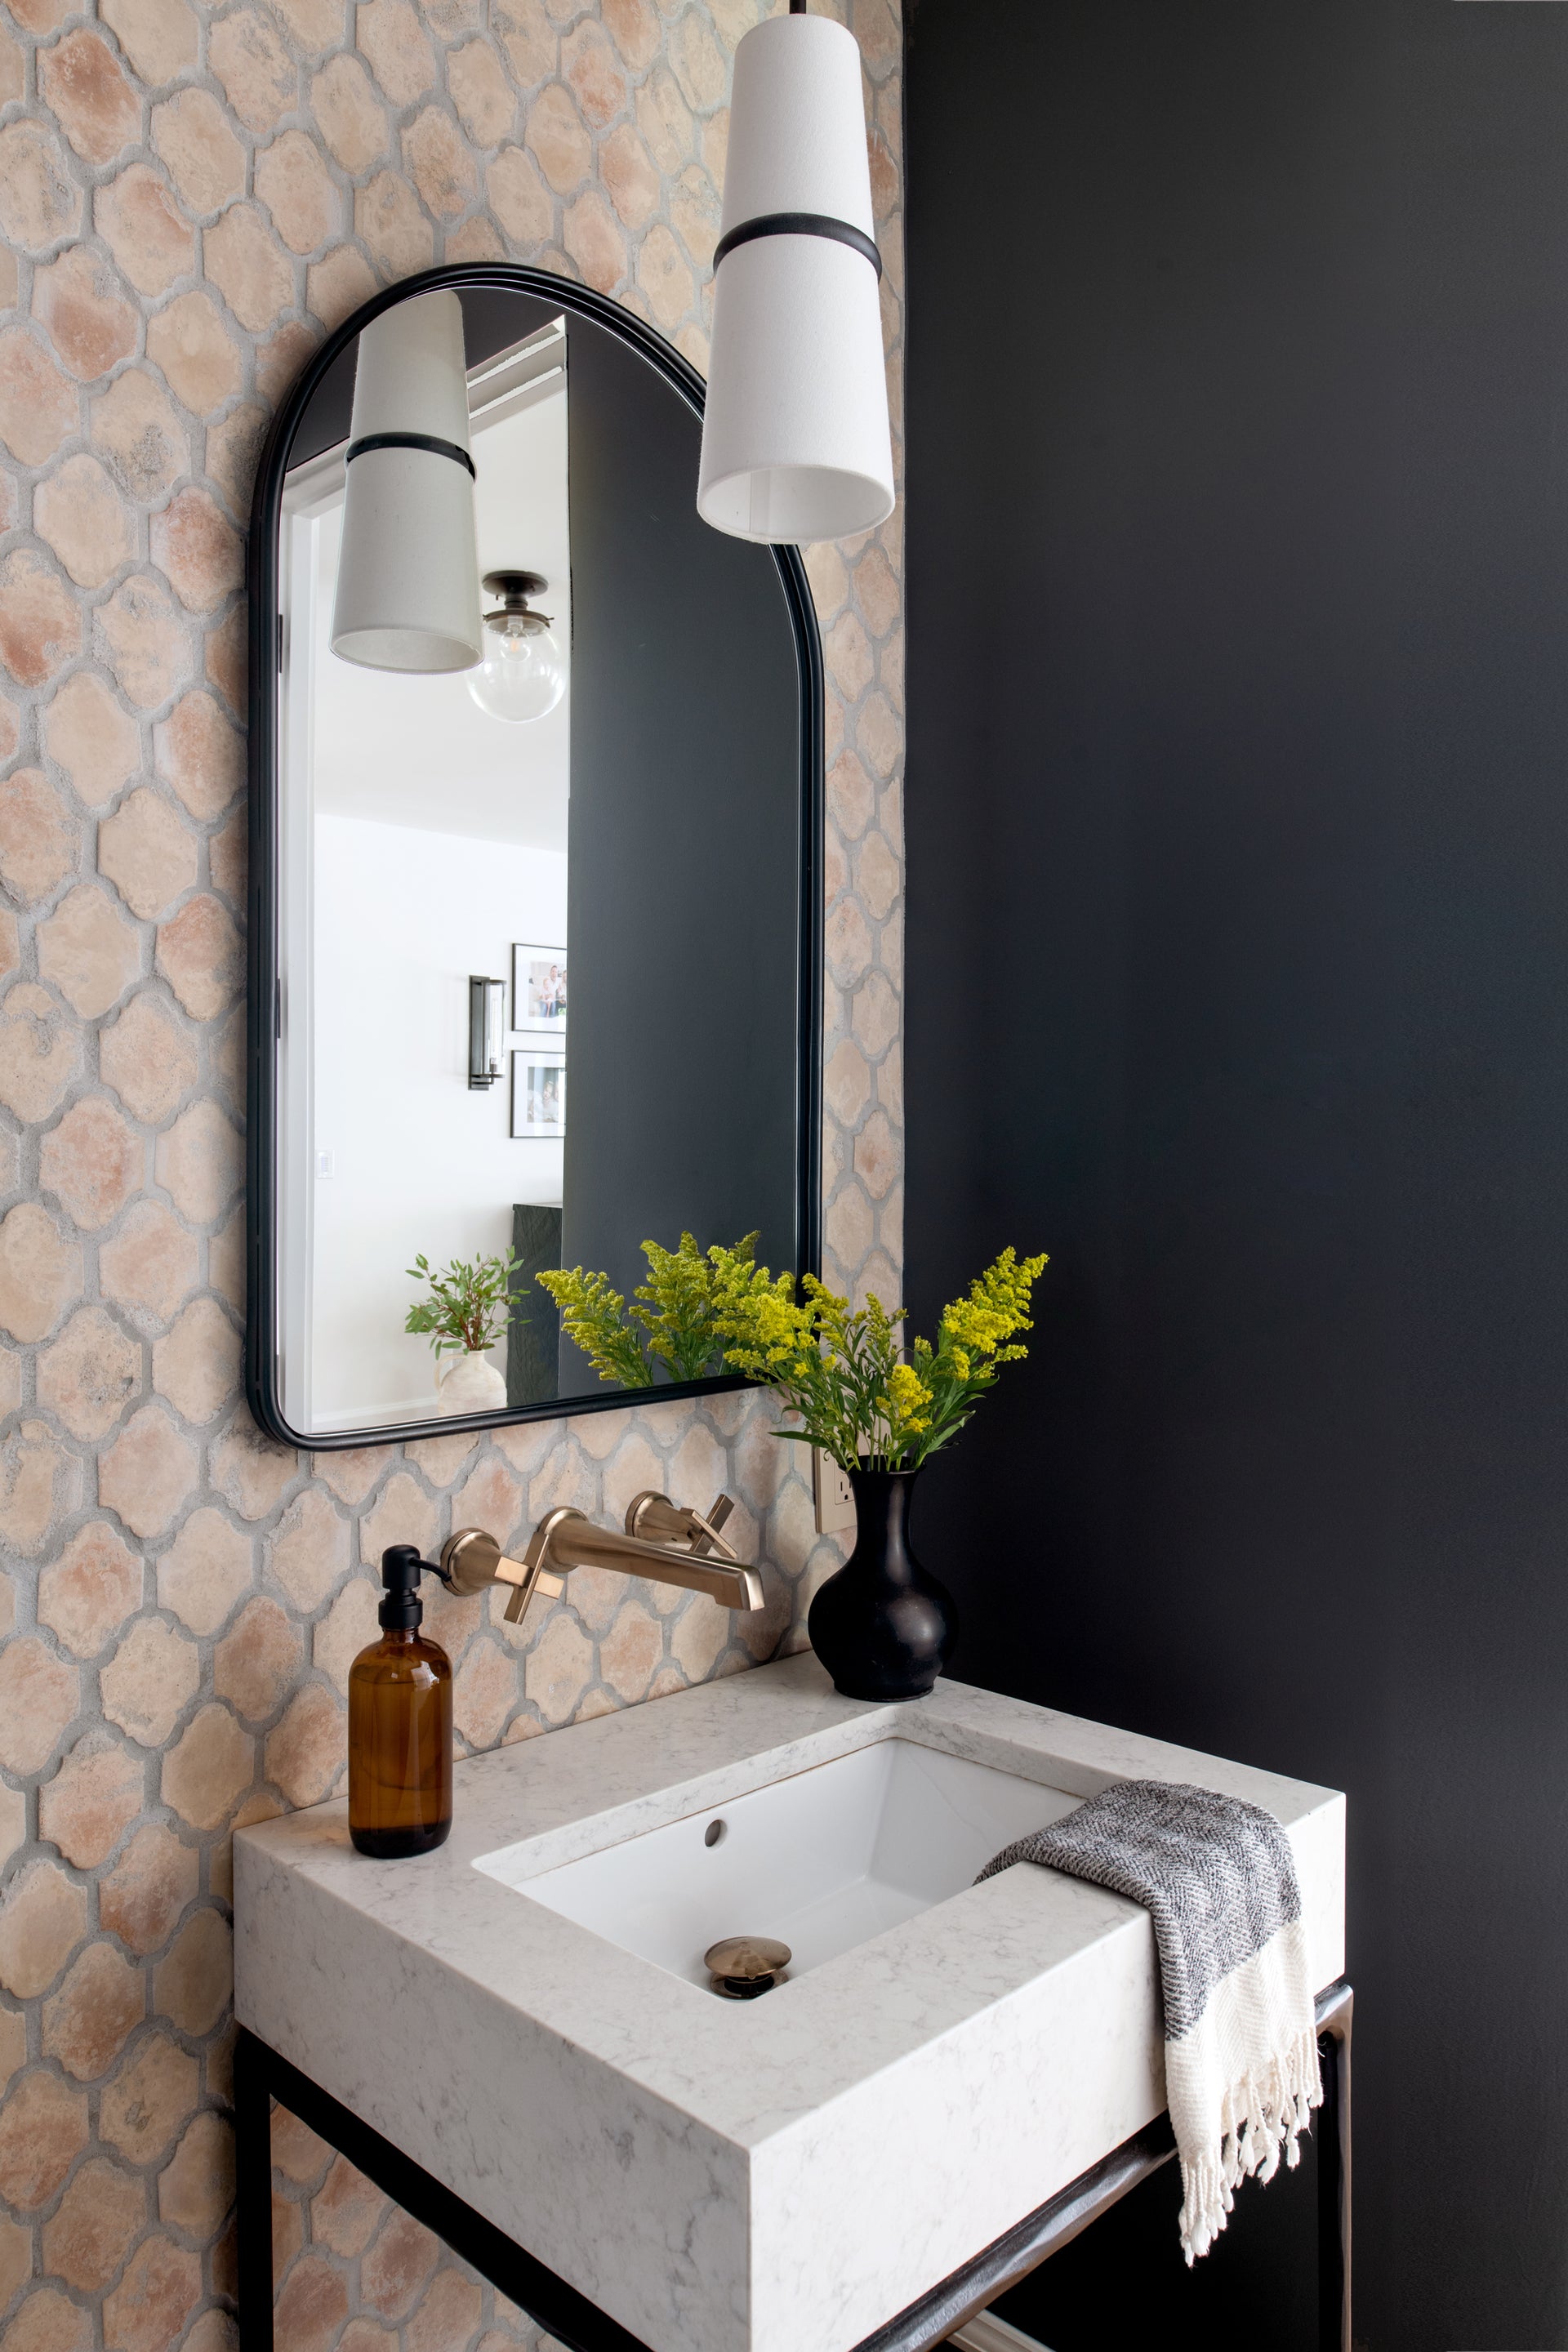 Small bathroom with terracotta tiled wall and gold in wall faucet and black rimmed, arched mirror